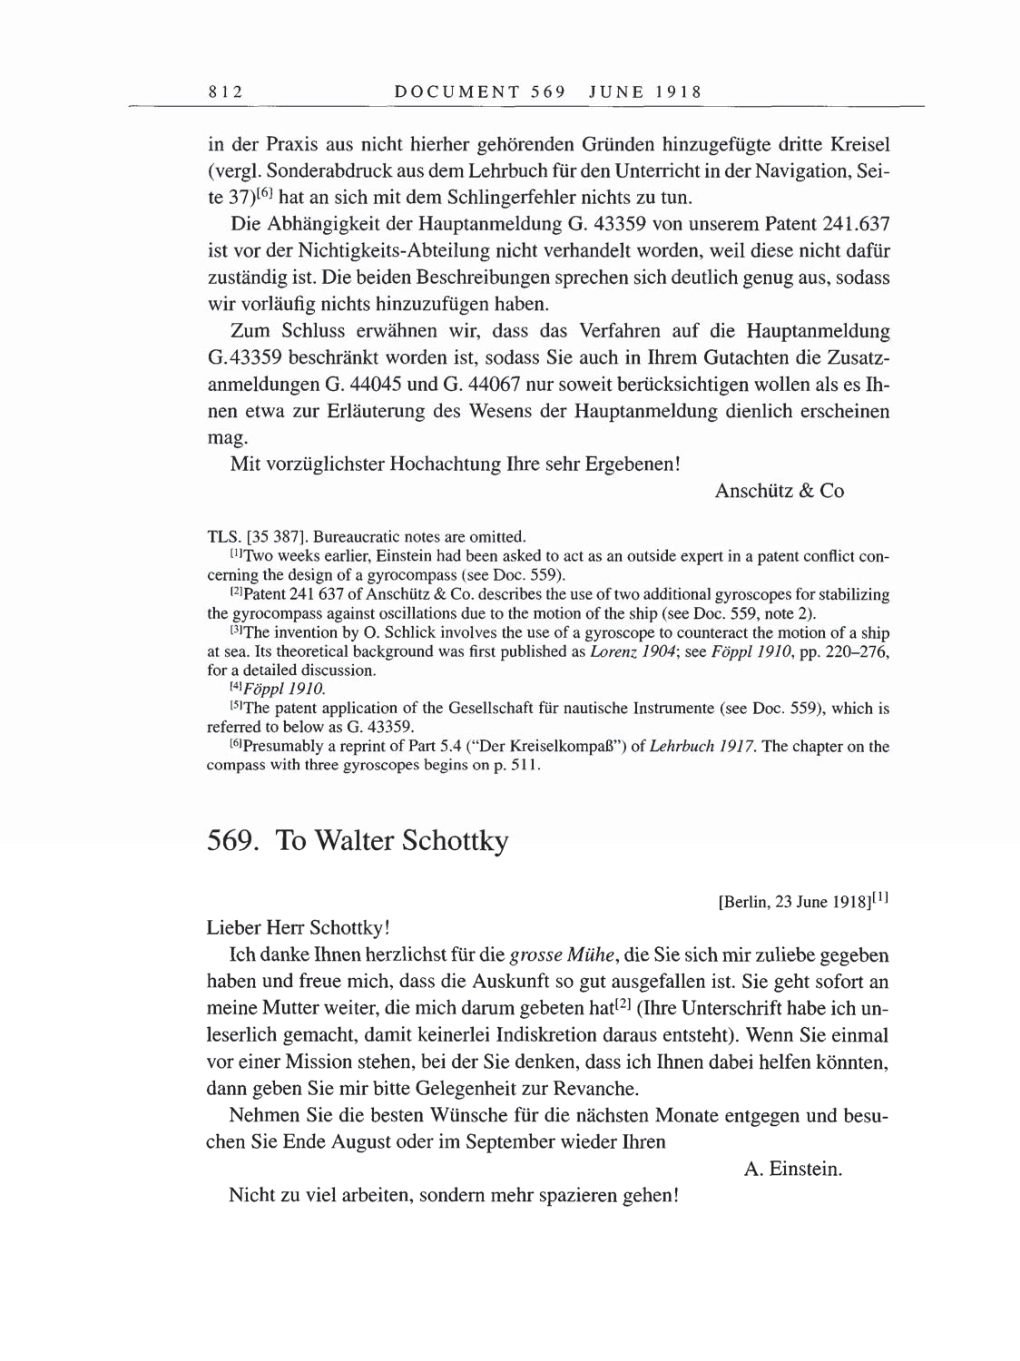 Volume 8, Part B: The Berlin Years: Correspondence 1918 page 812